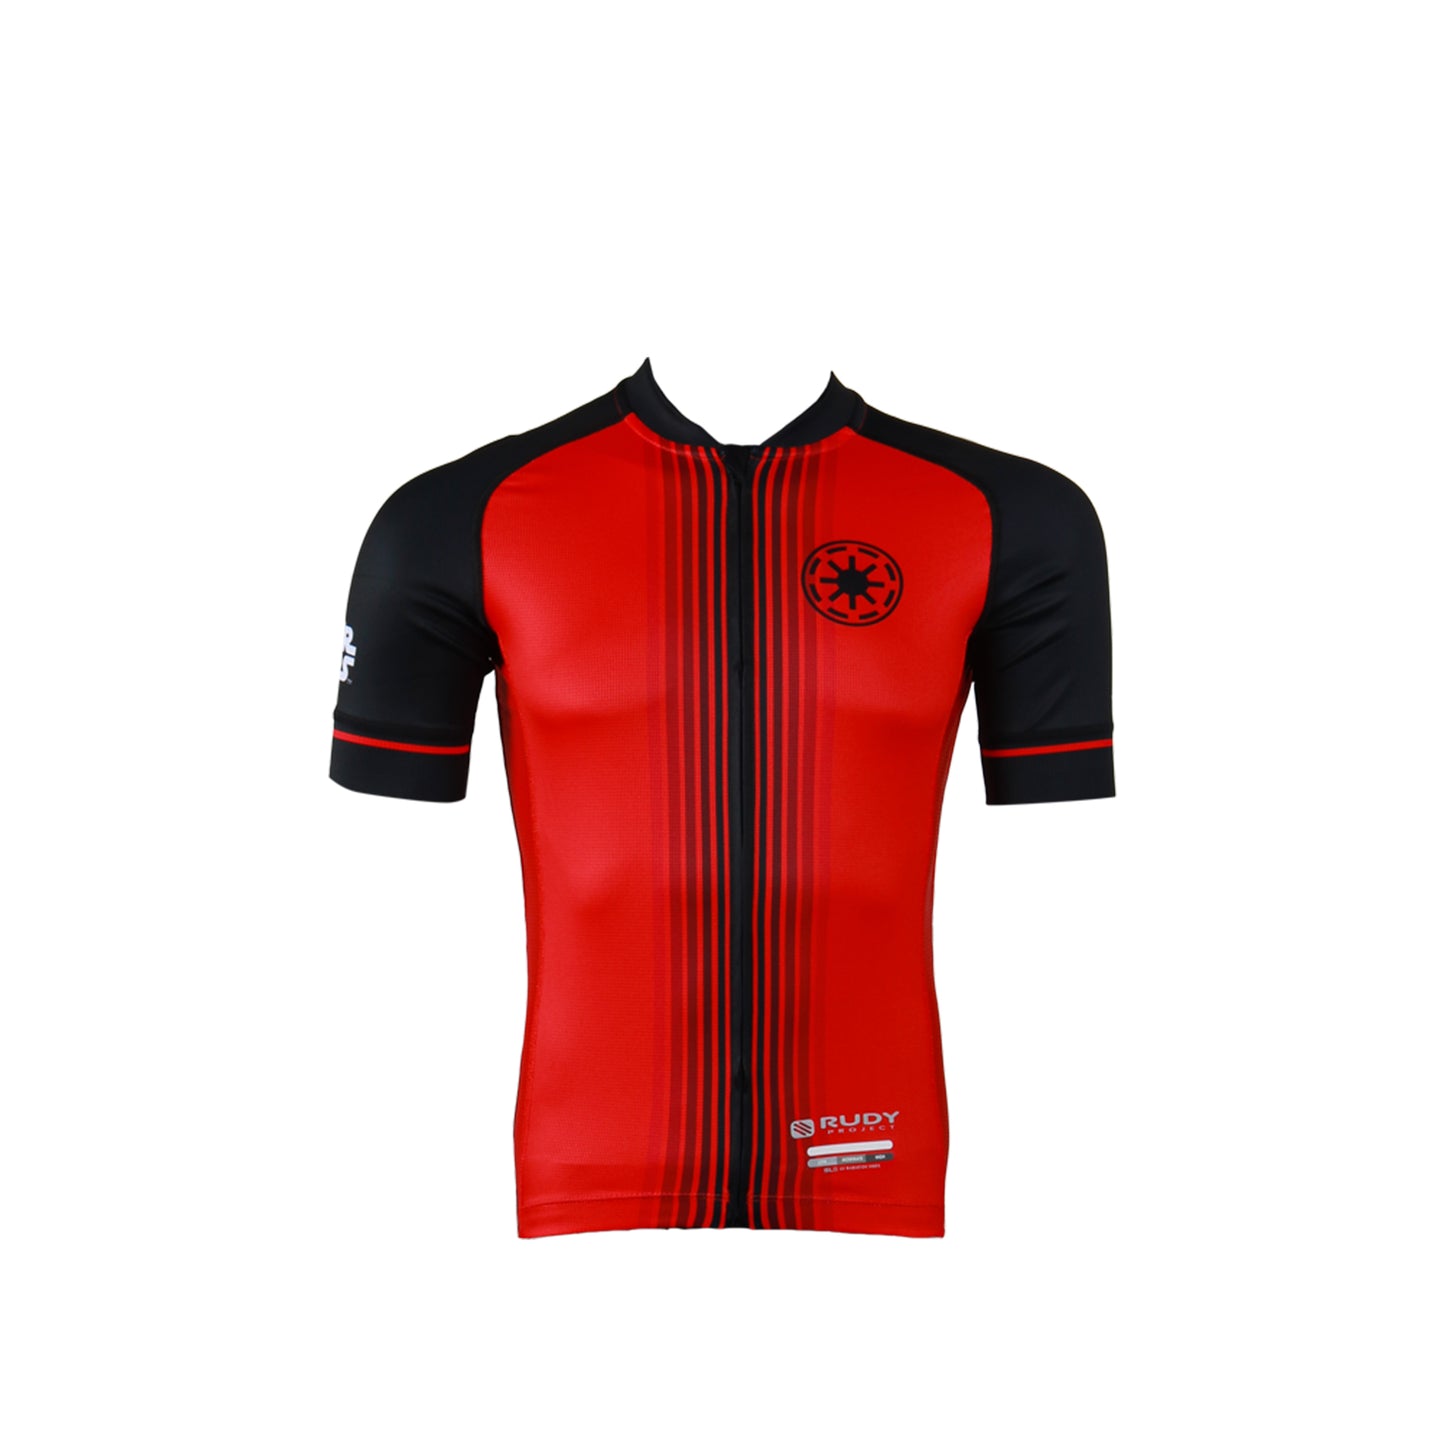 Rudy Project Star Wars Darth Vader Empire Cycling Jersey - Red